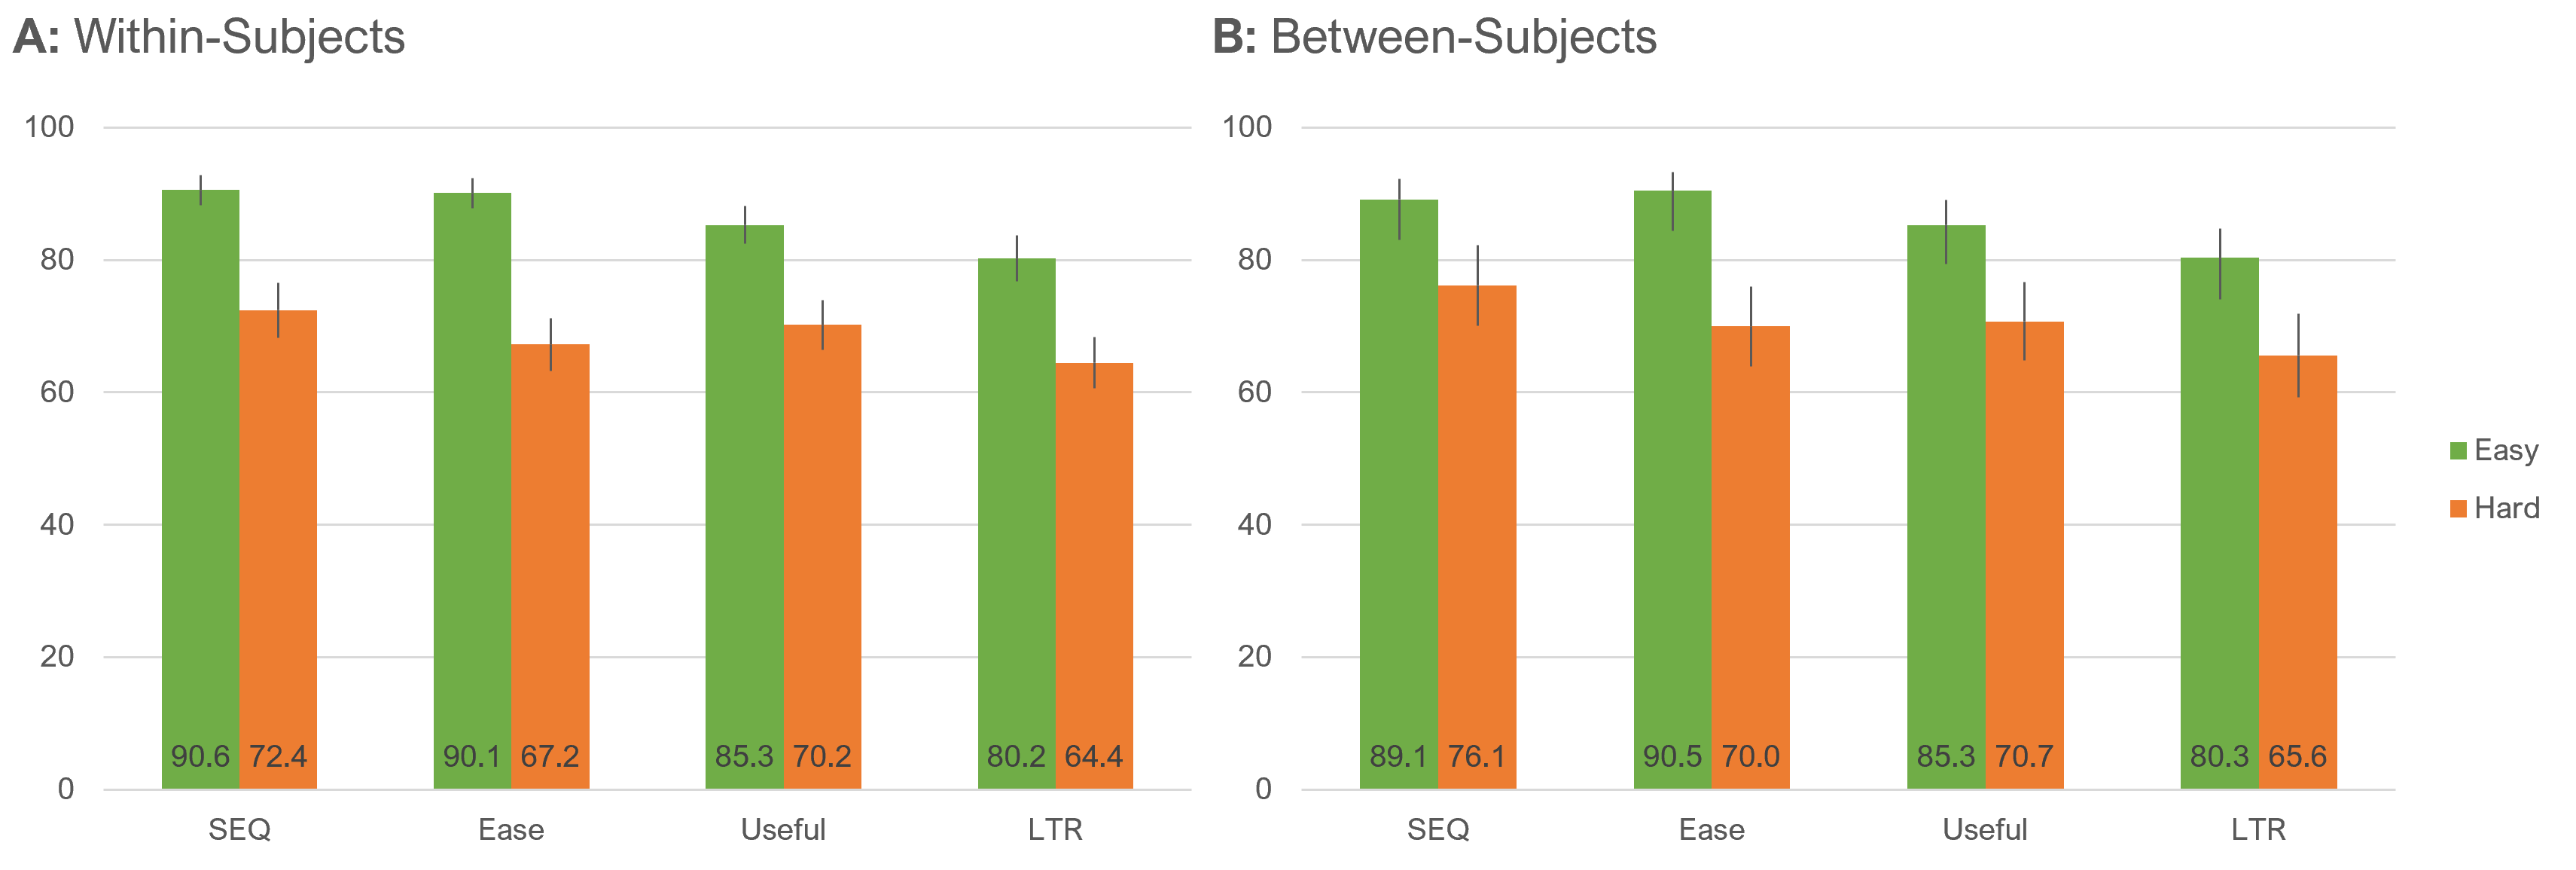 Difference in mean scores as a function of task difficulty for within- and between-subjects analyses (with 95% confidence intervals). This confirmed that our “hard” task was actually rated consistently harder than our “easy” task.